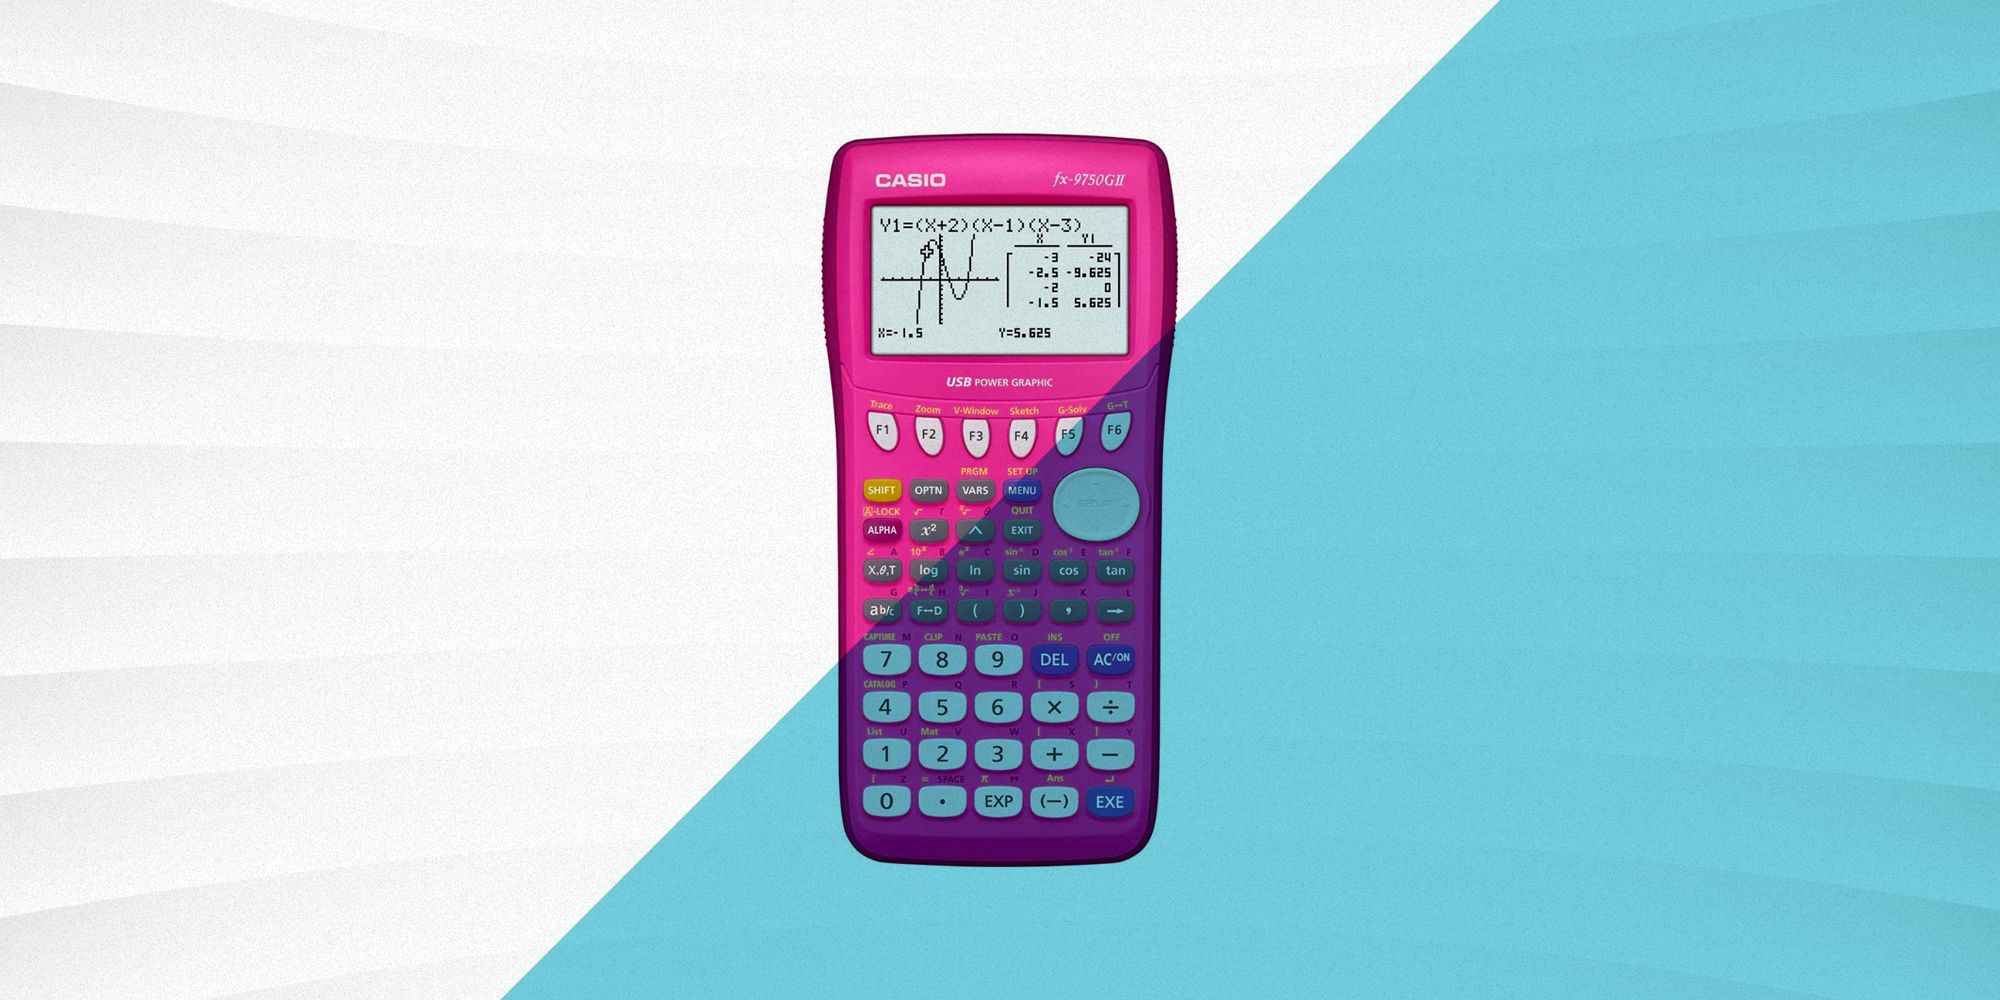 <p>Whether you’re a college student enrolled in a calculus course or a professional accountant with your own firm, having a dedicated calculator is essential to your success. These purpose-built devices allow you to perform a wide range of calculations quickly—powerful models can even tackle complicated calculus equations and graph visual representations of functions. </p><p>When it comes to simple math, you can always use your <a href="https://www.popularmechanics.com/technology/g36662601/best-cheap-cell-phones/">smartphone</a>, but for lots of quick work, there’s something more user-friendly about the physical buttons and single-function design of a calculator that still makes it a useful item to keep in your <a href="https://www.popularmechanics.com/home/g41133501/best-home-office-desks/">desk</a> or your <a href="https://www.popularmechanics.com/adventure/g37858497/best-laptop-bags/">laptop bag</a>.</p><h2 class="body-h2"><strong>The Best Calculators</strong></h2><ul><li> <strong>Best Overall: </strong><a href="https://www.amazon.com/dp/B096NJHL8M?tag=syndication-20&ascsubtag=%5Bartid%7C10060.g.37453128%5Bsrc%7Cmsn-us">Texas Instruments TI-84 Plus CE Graphing Calculator</a></li><li><strong>Best for Students: </strong><a href="https://www.amazon.com/dp/B06XS6V17P?tag=syndication-20&ascsubtag=%5Bartid%7C10060.g.37453128%5Bsrc%7Cmsn-us">Sharp EL-W516TBSL 16-Digit Advanced Scientific Calculator </a></li><li><strong>Best Budget Option: </strong><a href="https://www.amazon.com/dp/B0051MZSI6?tag=syndication-20&ascsubtag=%5Bartid%7C10060.g.37453128%5Bsrc%7Cmsn-us">Canon LS-82Z Handheld Calculator</a></li><li><strong>Best Scientific Calculator: </strong><a href="https://www.amazon.com/dp/B086Z79HXS?tag=syndication-20&ascsubtag=%5Bartid%7C10060.g.37453128%5Bsrc%7Cmsn-us">Casio fx-115ESPLUS2 2nd Edition Advanced Scientific Calculator</a></li><li><strong>Most User-Friendly Calculator: </strong><a href="https://www.amazon.com/dp/B00KD1S5OO?tag=syndication-20&ascsubtag=%5Bartid%7C10060.g.37453128%5Bsrc%7Cmsn-us">Casio fx-9750GII Graphing Calculator</a></li></ul><h2 class="body-h2"><strong>What to Consider</strong></h2><h3 class="body-h3"><strong>Capabilities</strong></h3><p class="body-text">From graphing to scientific to four-function, different types of calculators have vastly different capabilities. Be sure to choose one that will serve your particular needs. Additionally, if you plan to use it for college entrance exams, make sure the model you are going to purchase is approved for use during testing.</p><p>Generally speaking, elementary and middle school students are best served by scientific calculators; high school students probably need graphing calculators; and professionals who work with numbers should look for accounting calculators.</p><h3 class="body-h3"><strong>Battery Life and Power Source</strong></h3><p>Speaking of college entrance exams, nothing could be worse than your calculator running out of power before you finish your test. Calculators are battery-powered, solar-powered, or a hybrid of both—and a few higher-end models are rechargeable. We recommend battery-powered calculators for most people, though simple four-function options can last for a while on the solar panel alone. </p><h2 class="body-h2">How We Selected</h2><p>We read through a wide breadth of professional reviews to find consensus on the best calculators in a number of different categories. We also kept different coursework requirements, professional duties, and price points in mind, ensuring that our selections are useful to a wide range of people. We also made sure that the models we chose were well-regarded by customers, and considered the models we have and use around the office. No matter your calculation needs, you should be able to find one that’s right for you. </p>